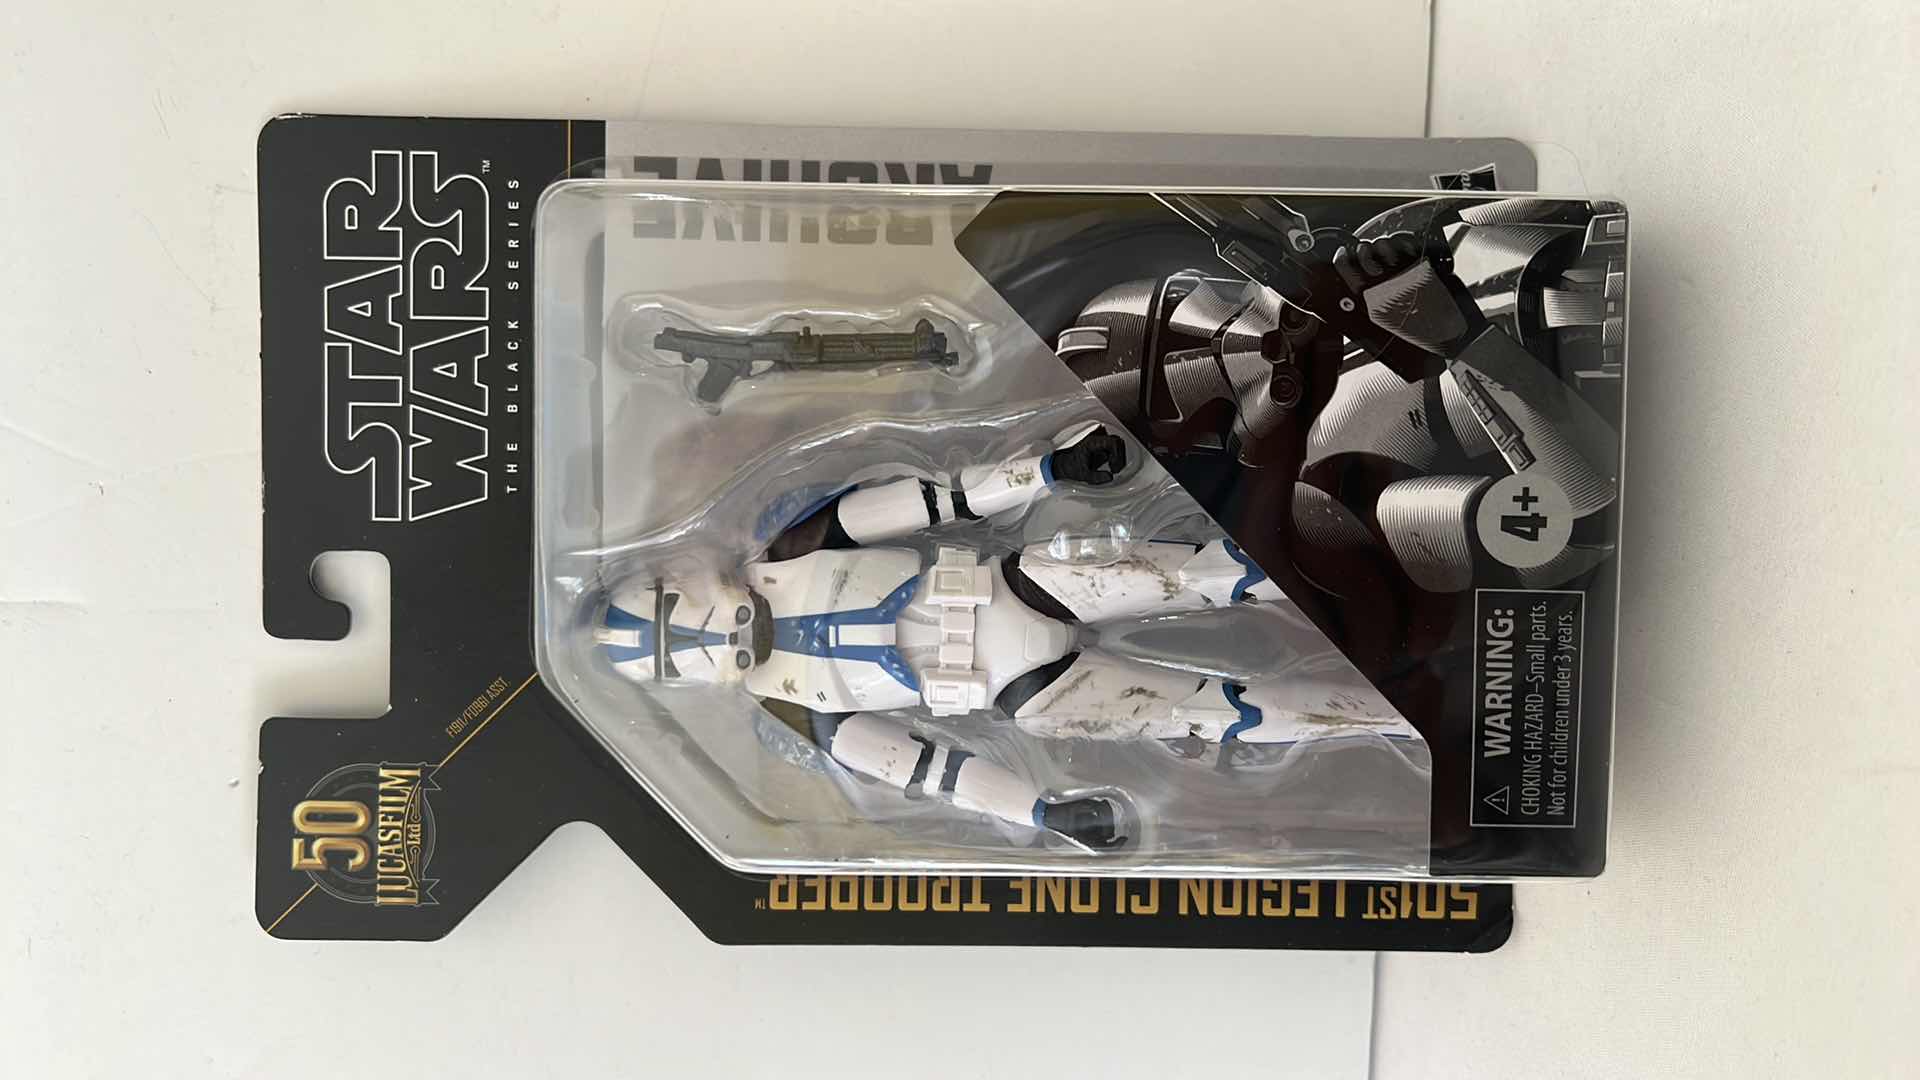 Photo 1 of BRAND NEW STAR WARS THE BLACK SERIES “501ST LEGION CLONE TROOPER” ACTION FIGURE $29